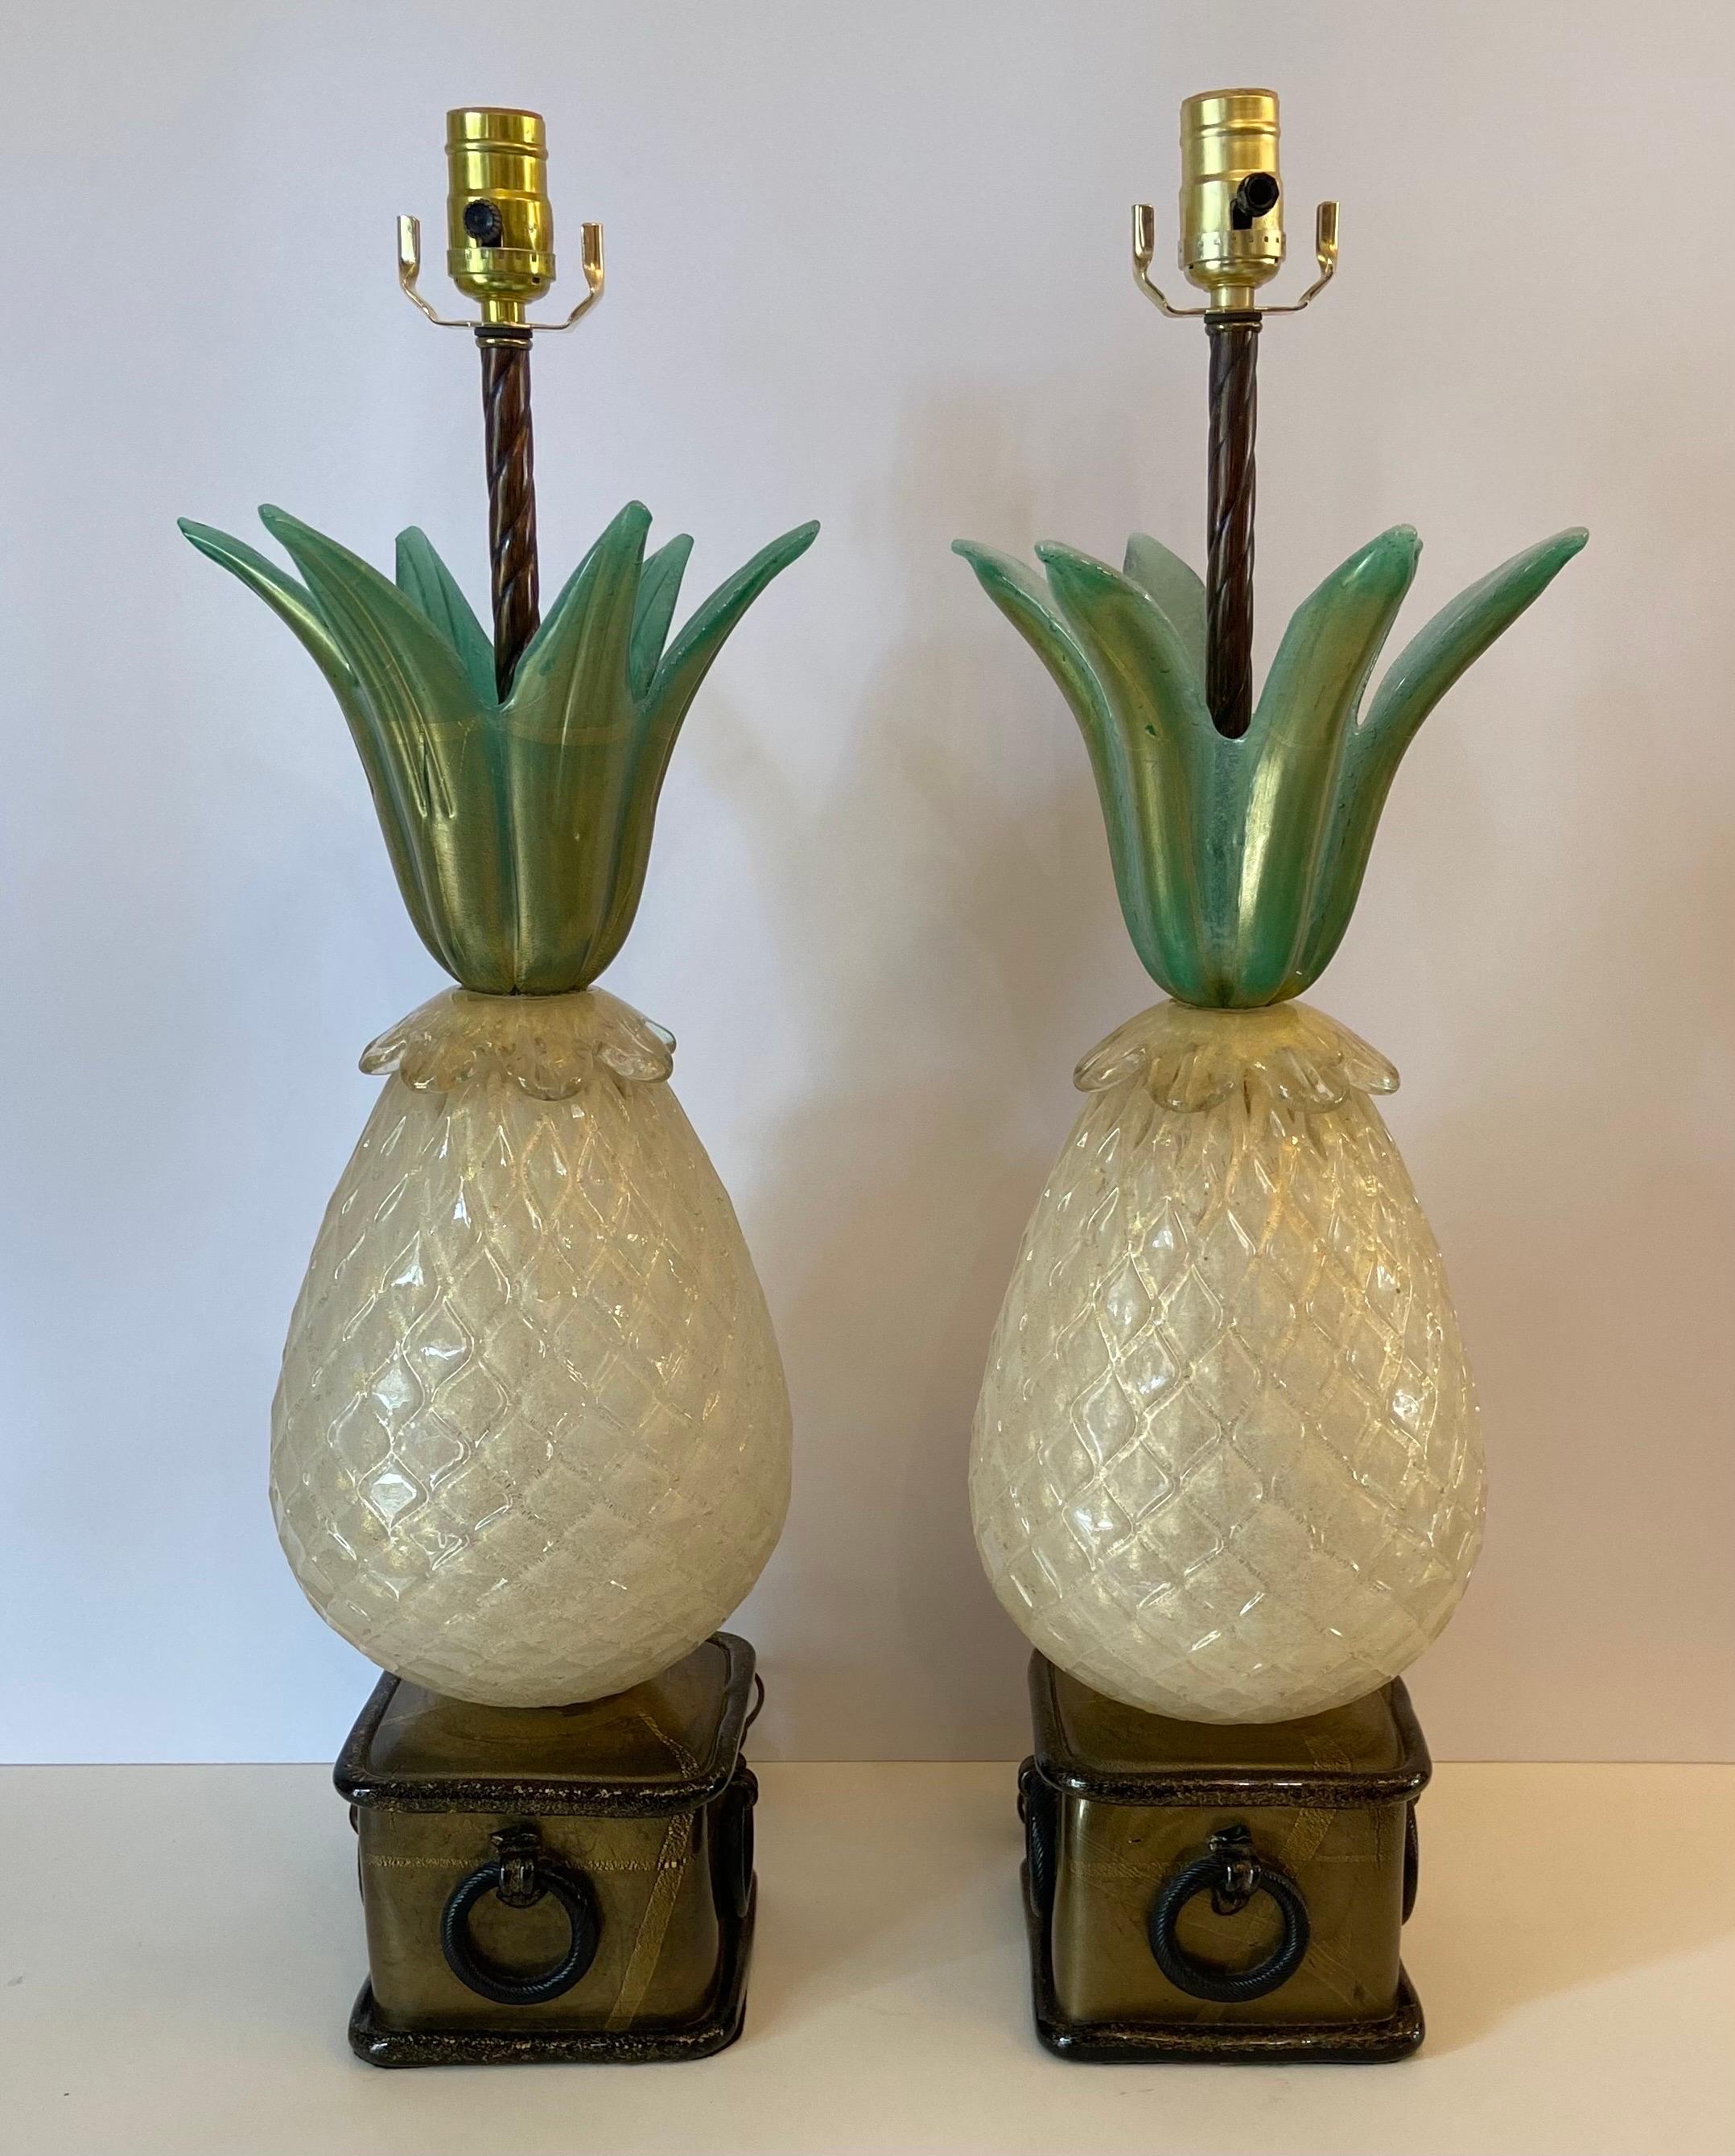 Pair of Murano Glass Pineapple Lamps by Barover In Good Condition For Sale In West Palm Beach, FL